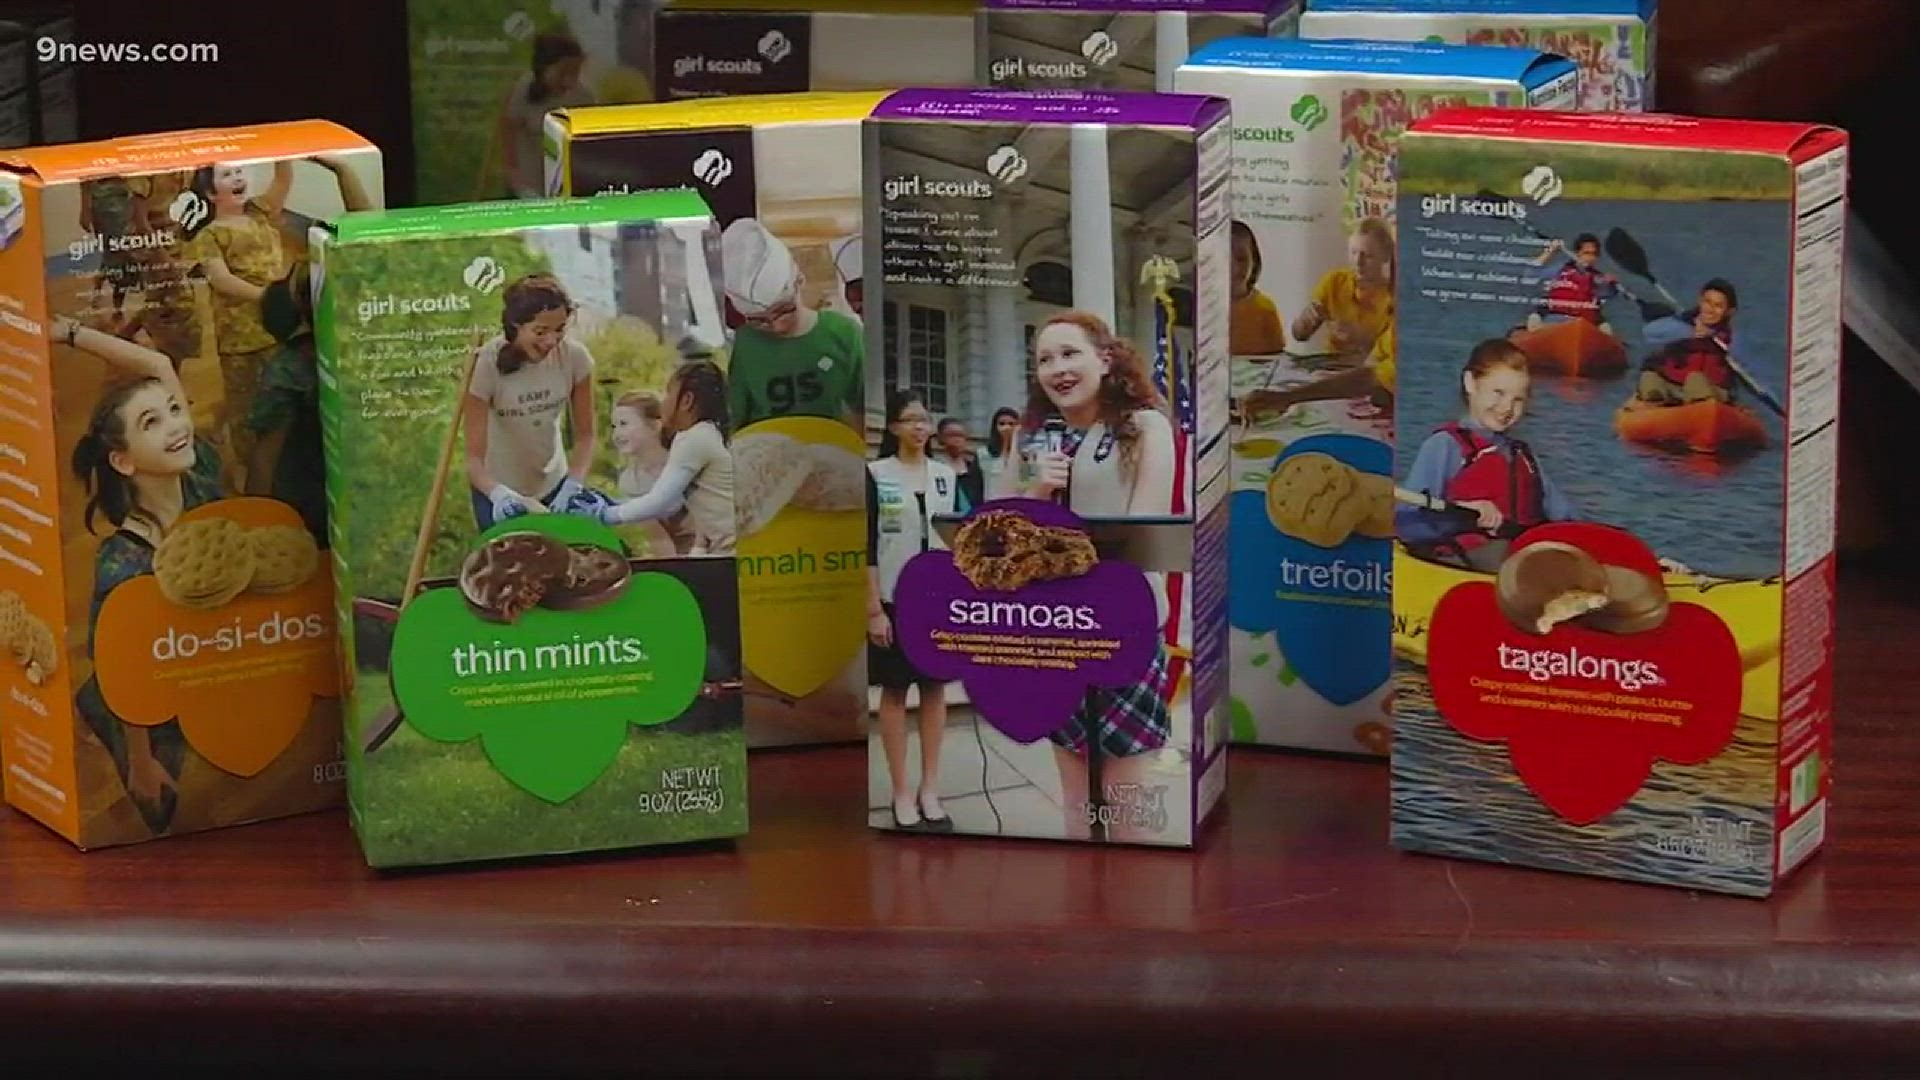 You know the cookies. You love the cookies - and they're back. Sales started this weekend. While all flavors are good out of the box, there's a way to make them even more tasty! We've got three Girl Scouts in to help show us how.